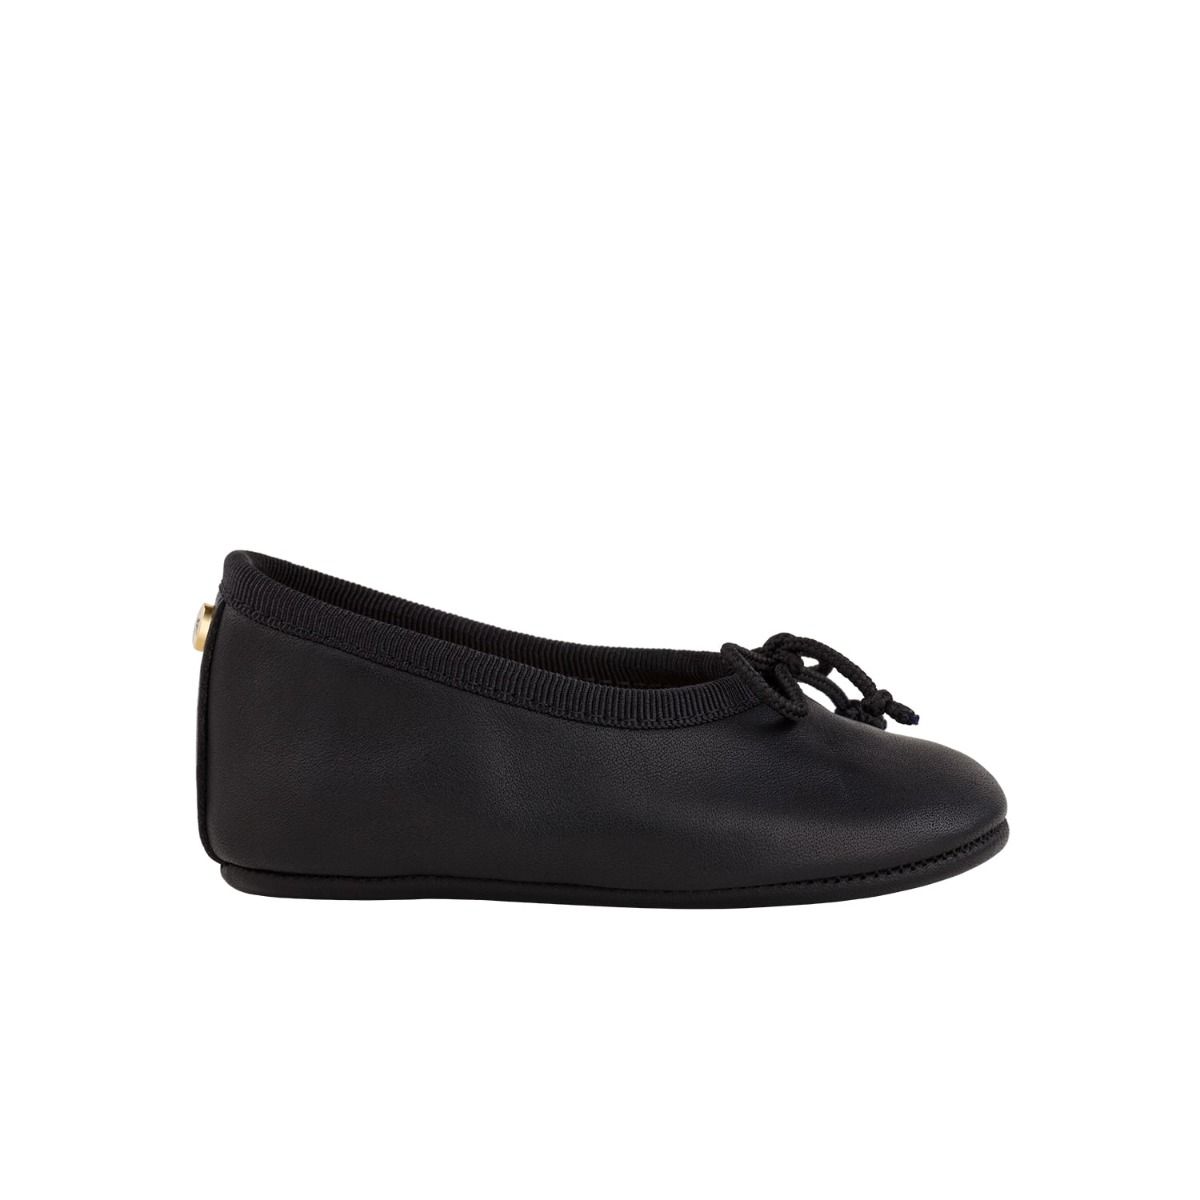 Baby ballet flats in black leather with bow detail in cord.